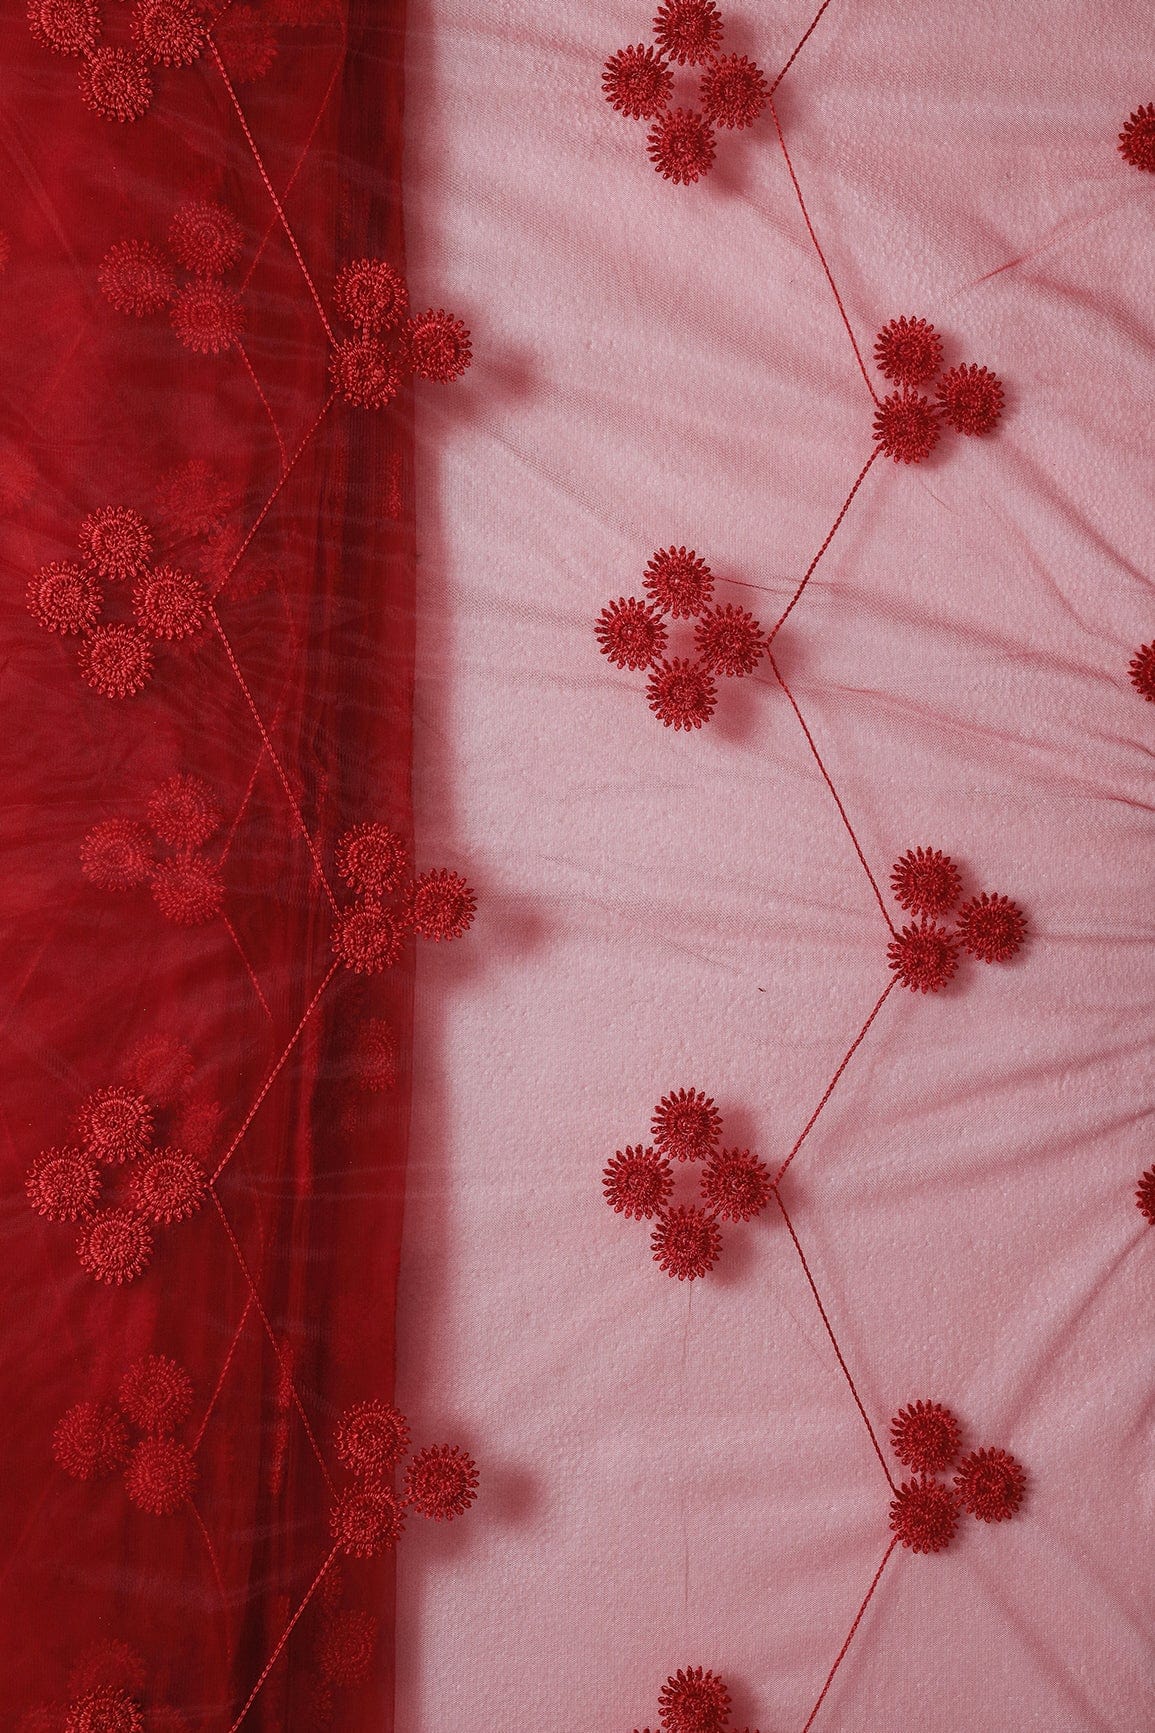 doeraa Embroidery Fabrics Red Color Thread Geometric Embroidery Work On Red Soft Net Fabric